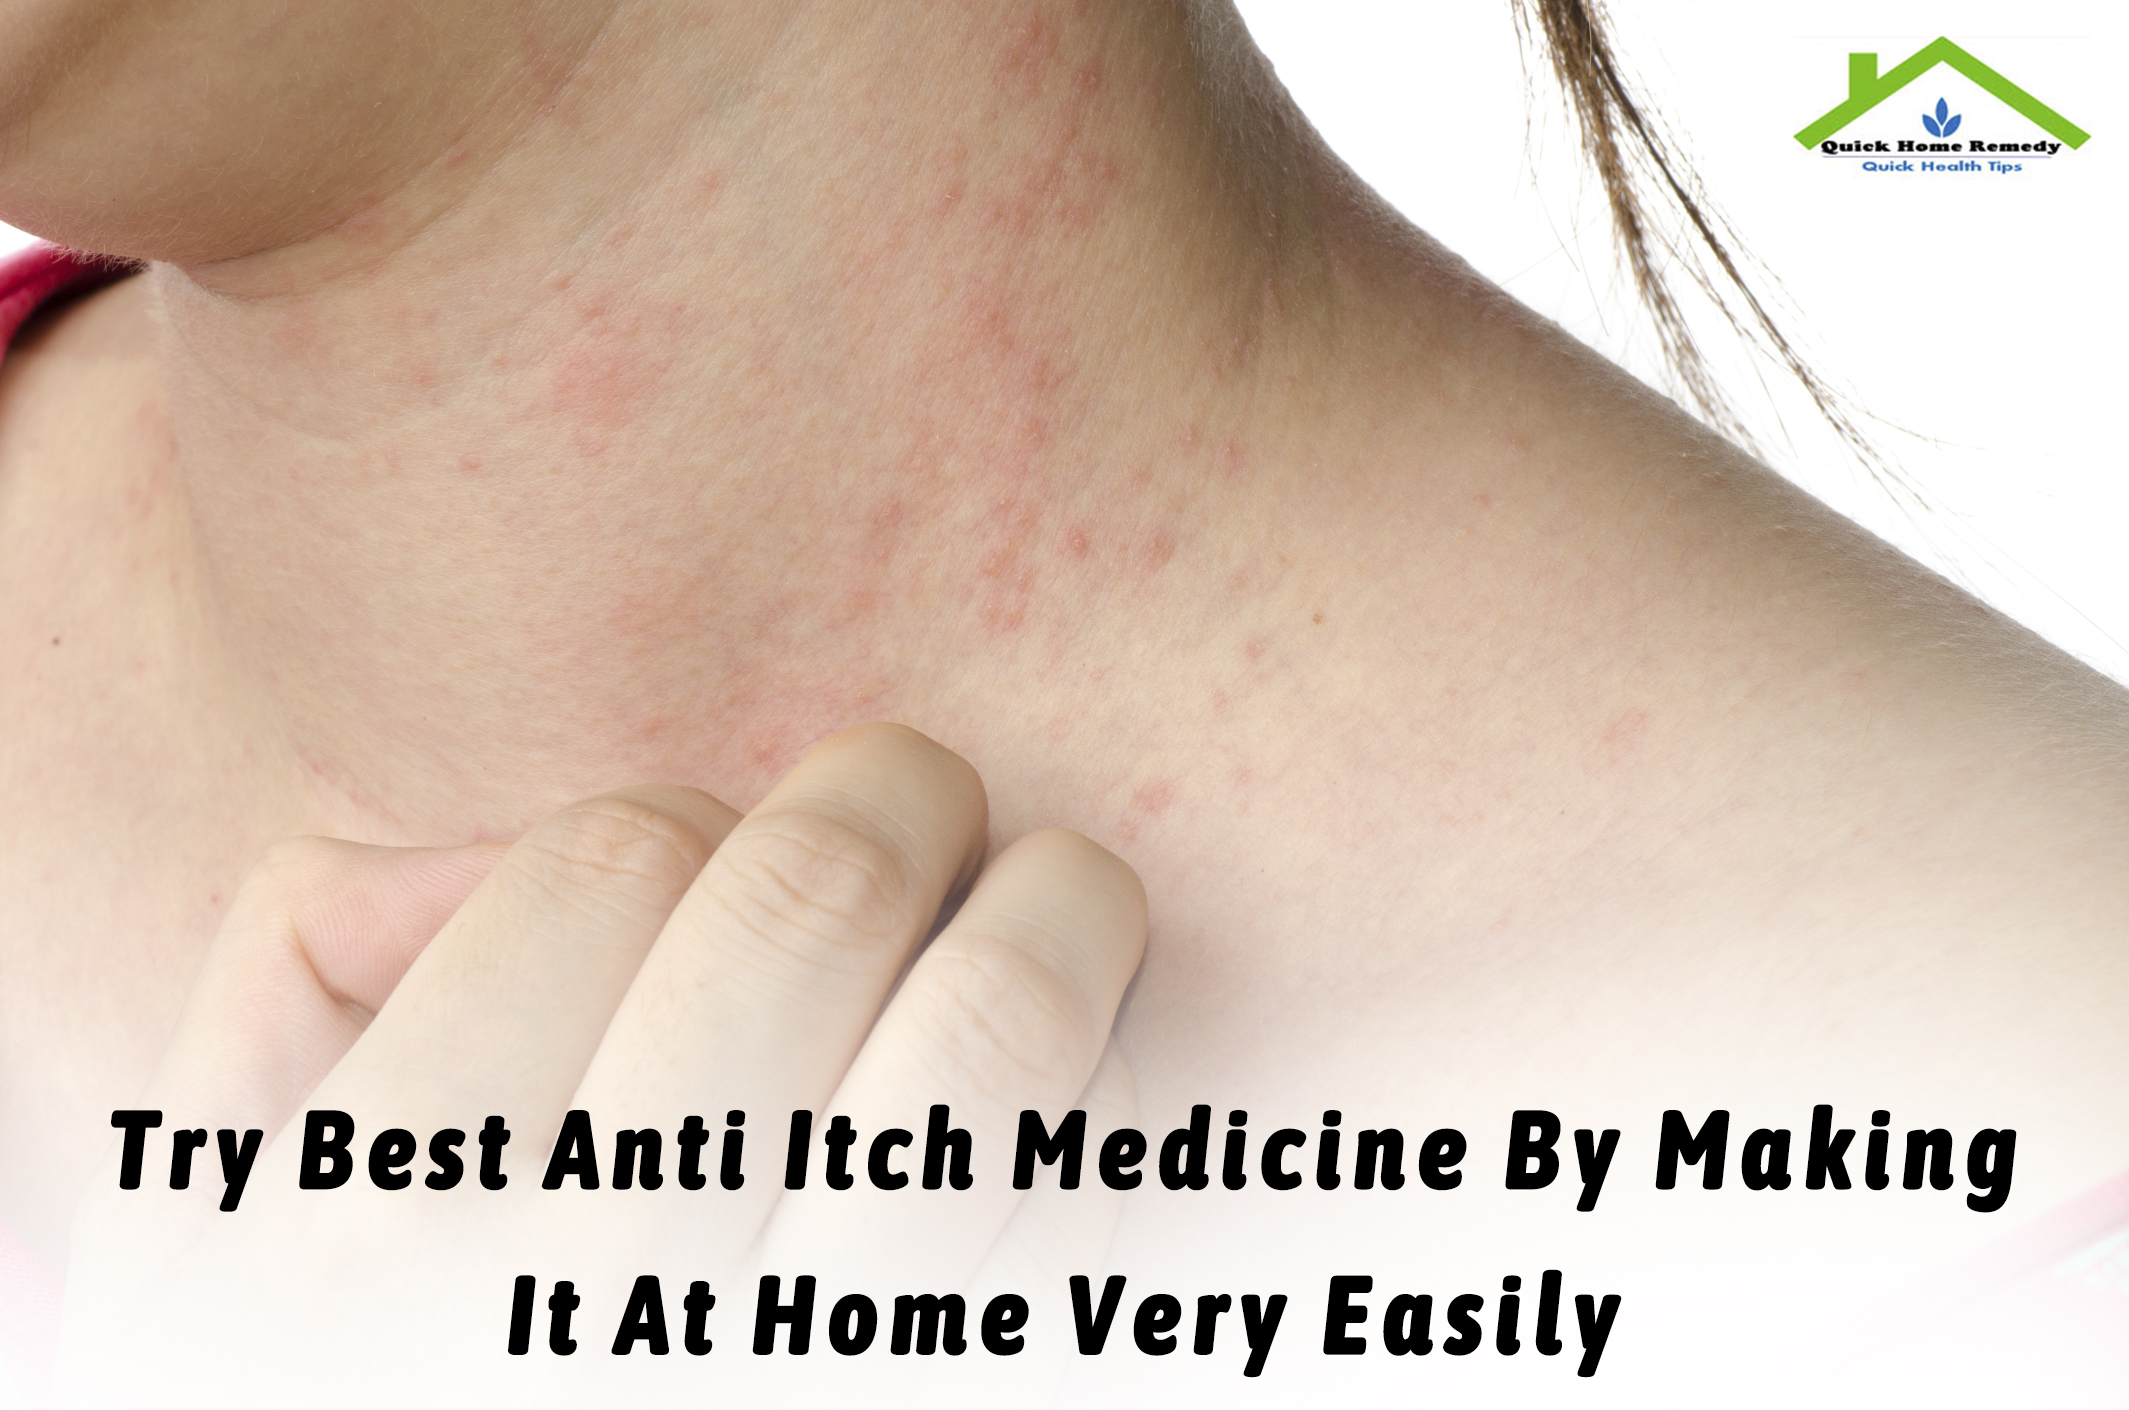 Try Best Anti Itch Medicine By Making It At Home Very Easily